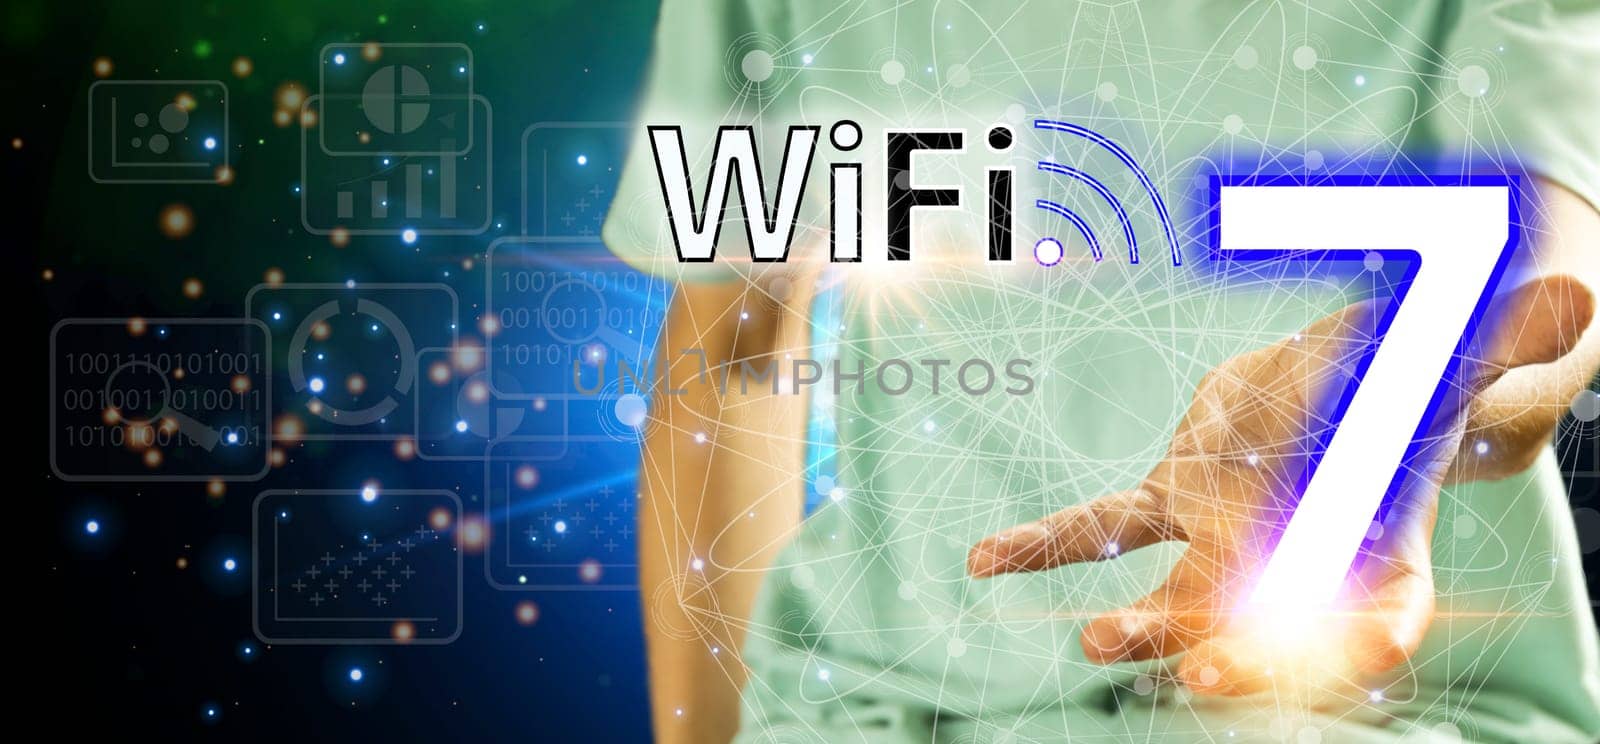 concept technology wifi 7 connect to the internet world with new technology